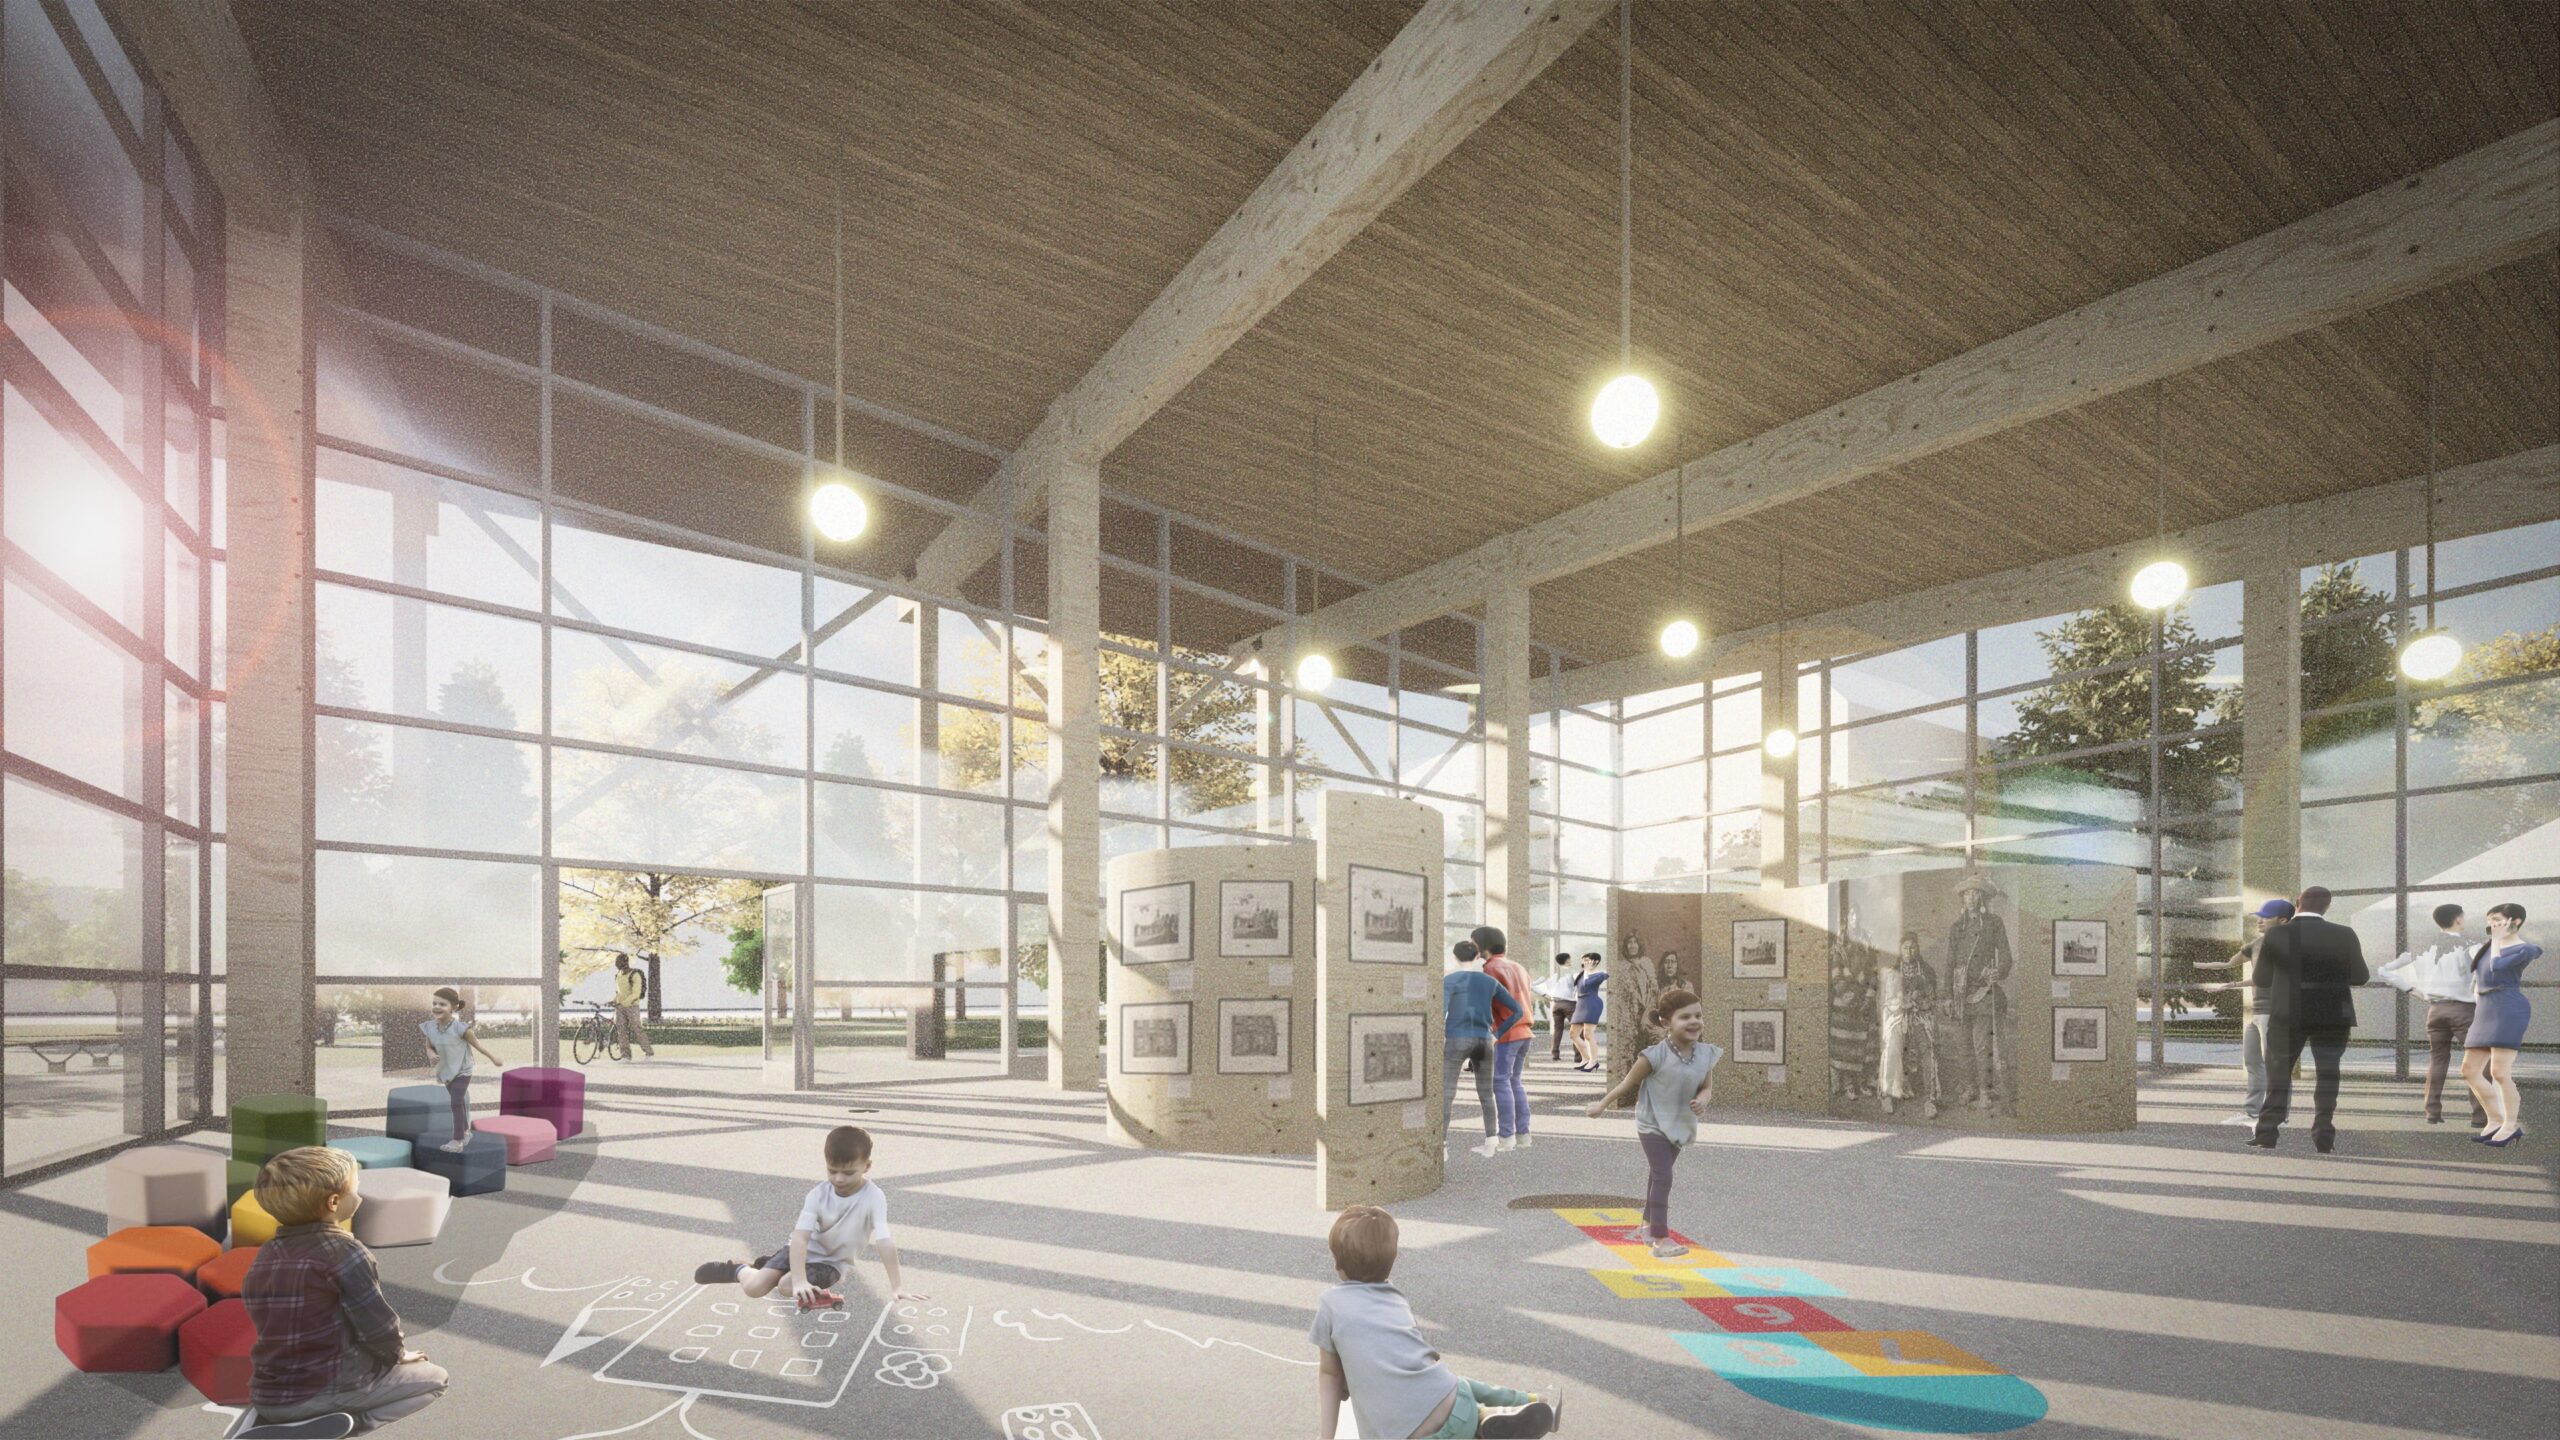 Interior visualization of Community building, designed by nba architects. Project is focused on sustainable construction and includes traditional exposed mass-timber, post & beam construction, and a low pitch long-span roof.